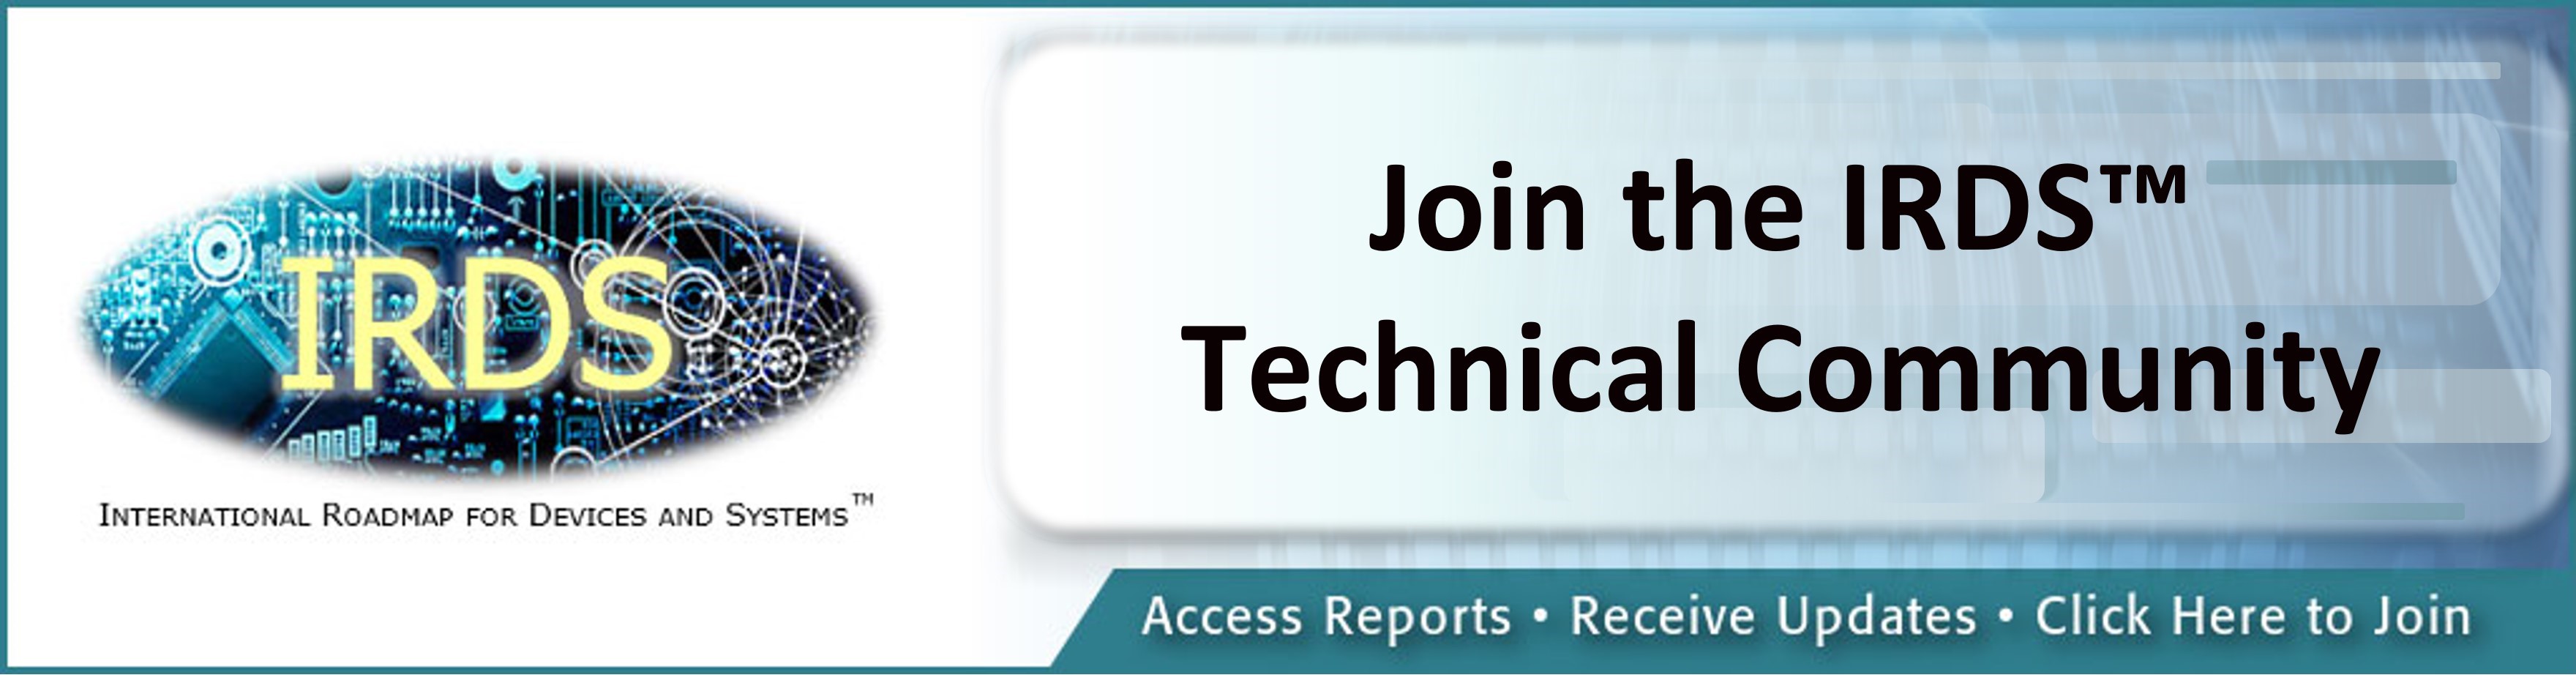 Join the IRDS IEEE Technical Community